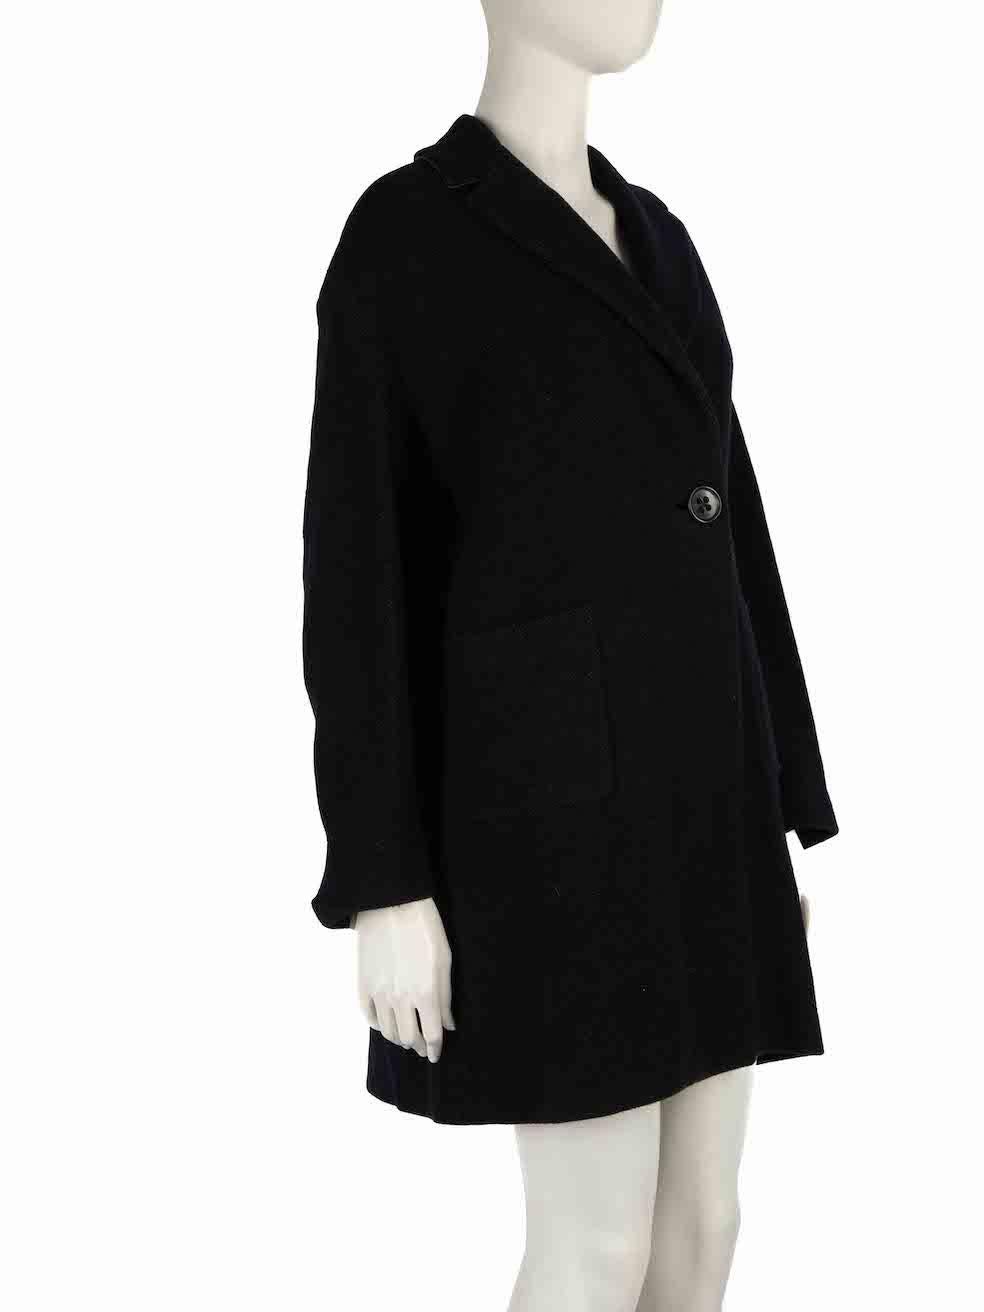 CONDITION is Very good. Minimal wear to coat is evident. Minimal wear to the fabric composition with light pilling seen throughout on this used Agnona designer resale item.
 
 
 
 Details
 
 
 Black
 
 Wool
 
 Coat
 
 Single breasted
 
 Button